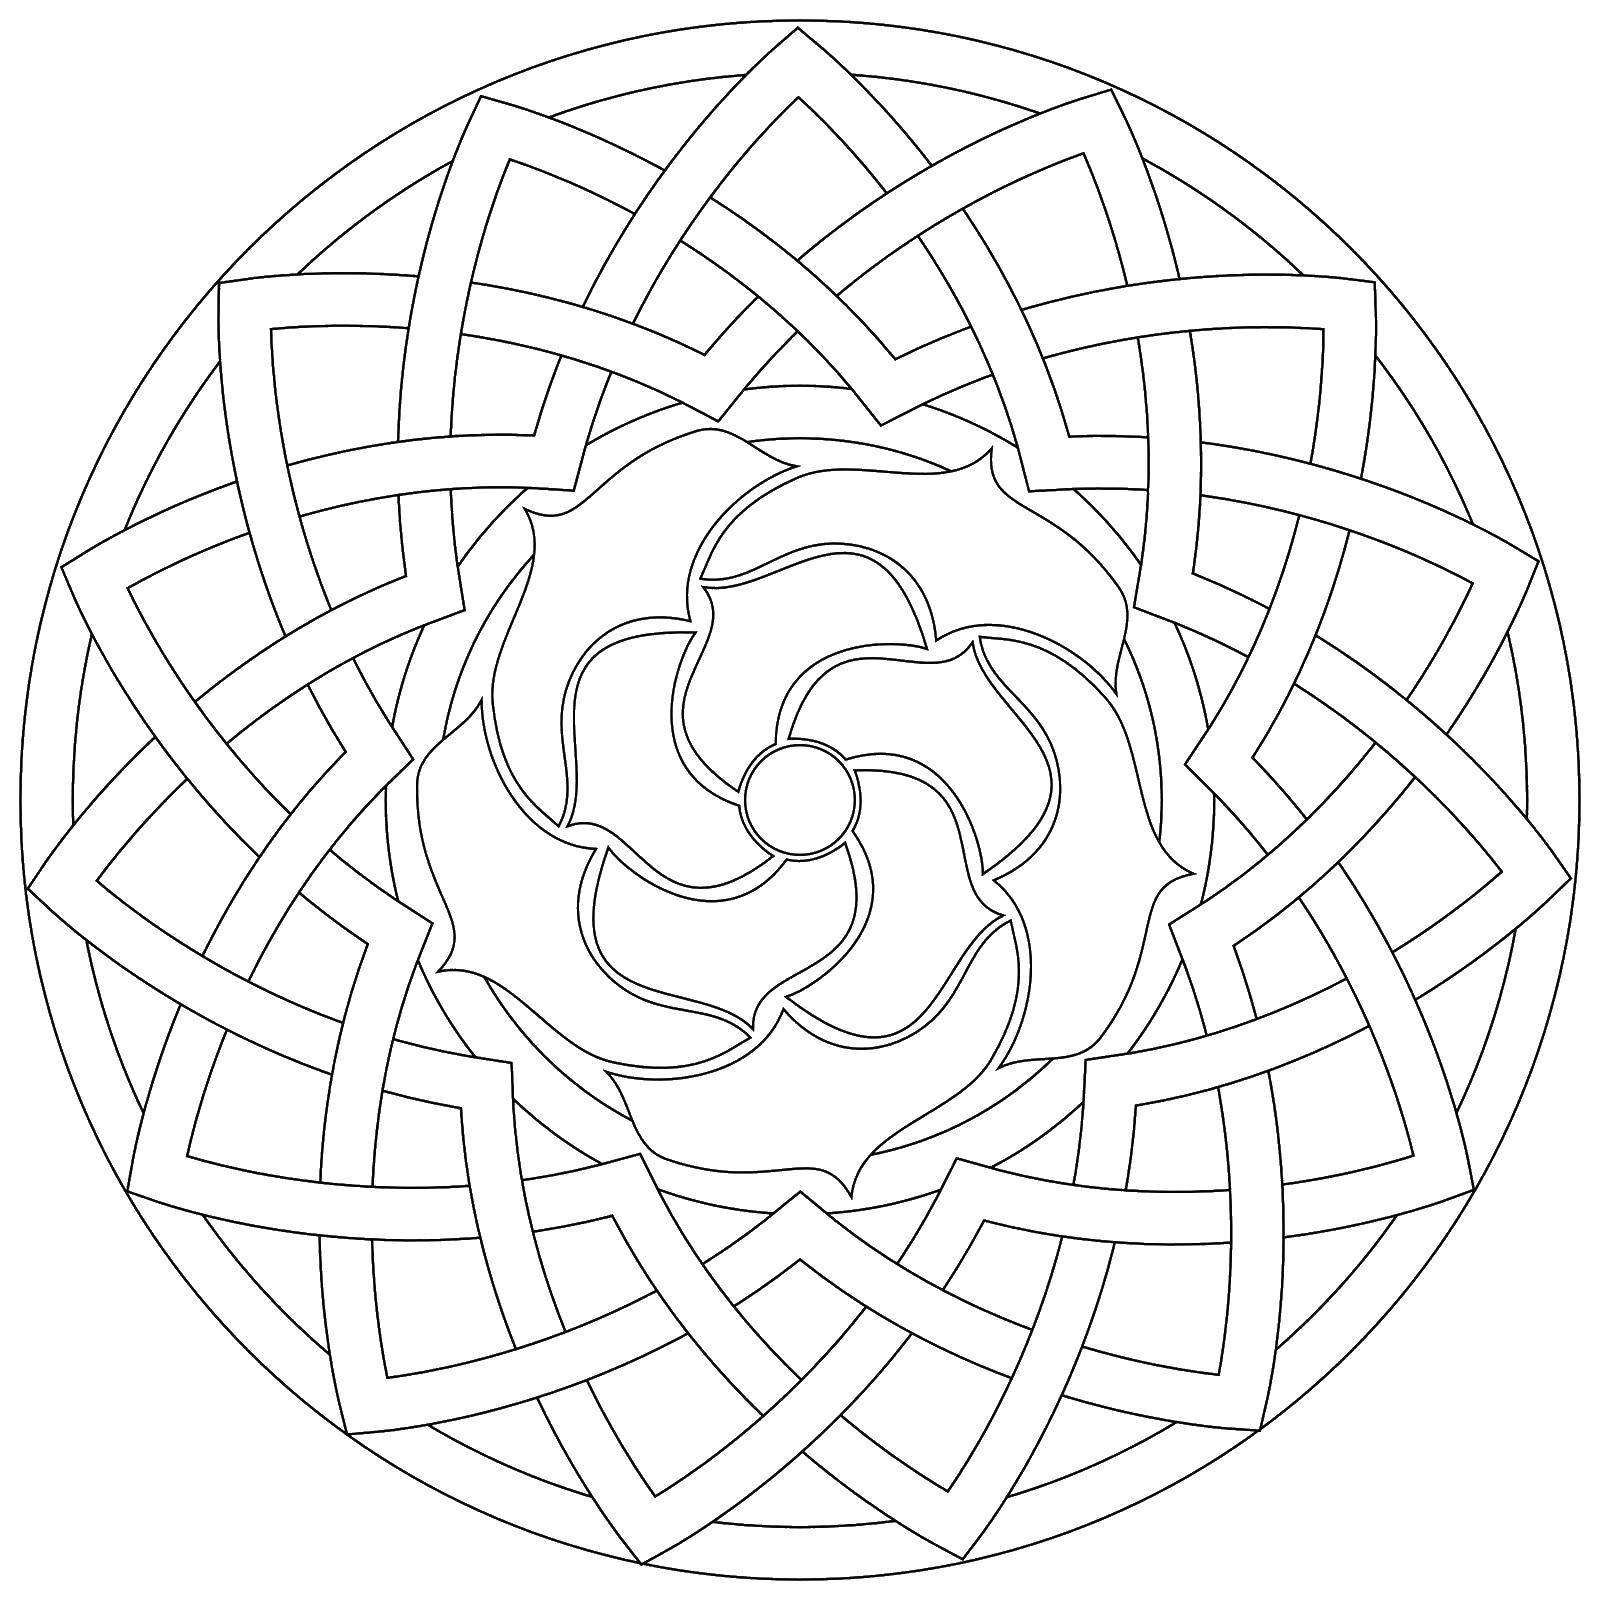 Coloring Pattern flower. Category With patterns. Tags:  pattern flower.